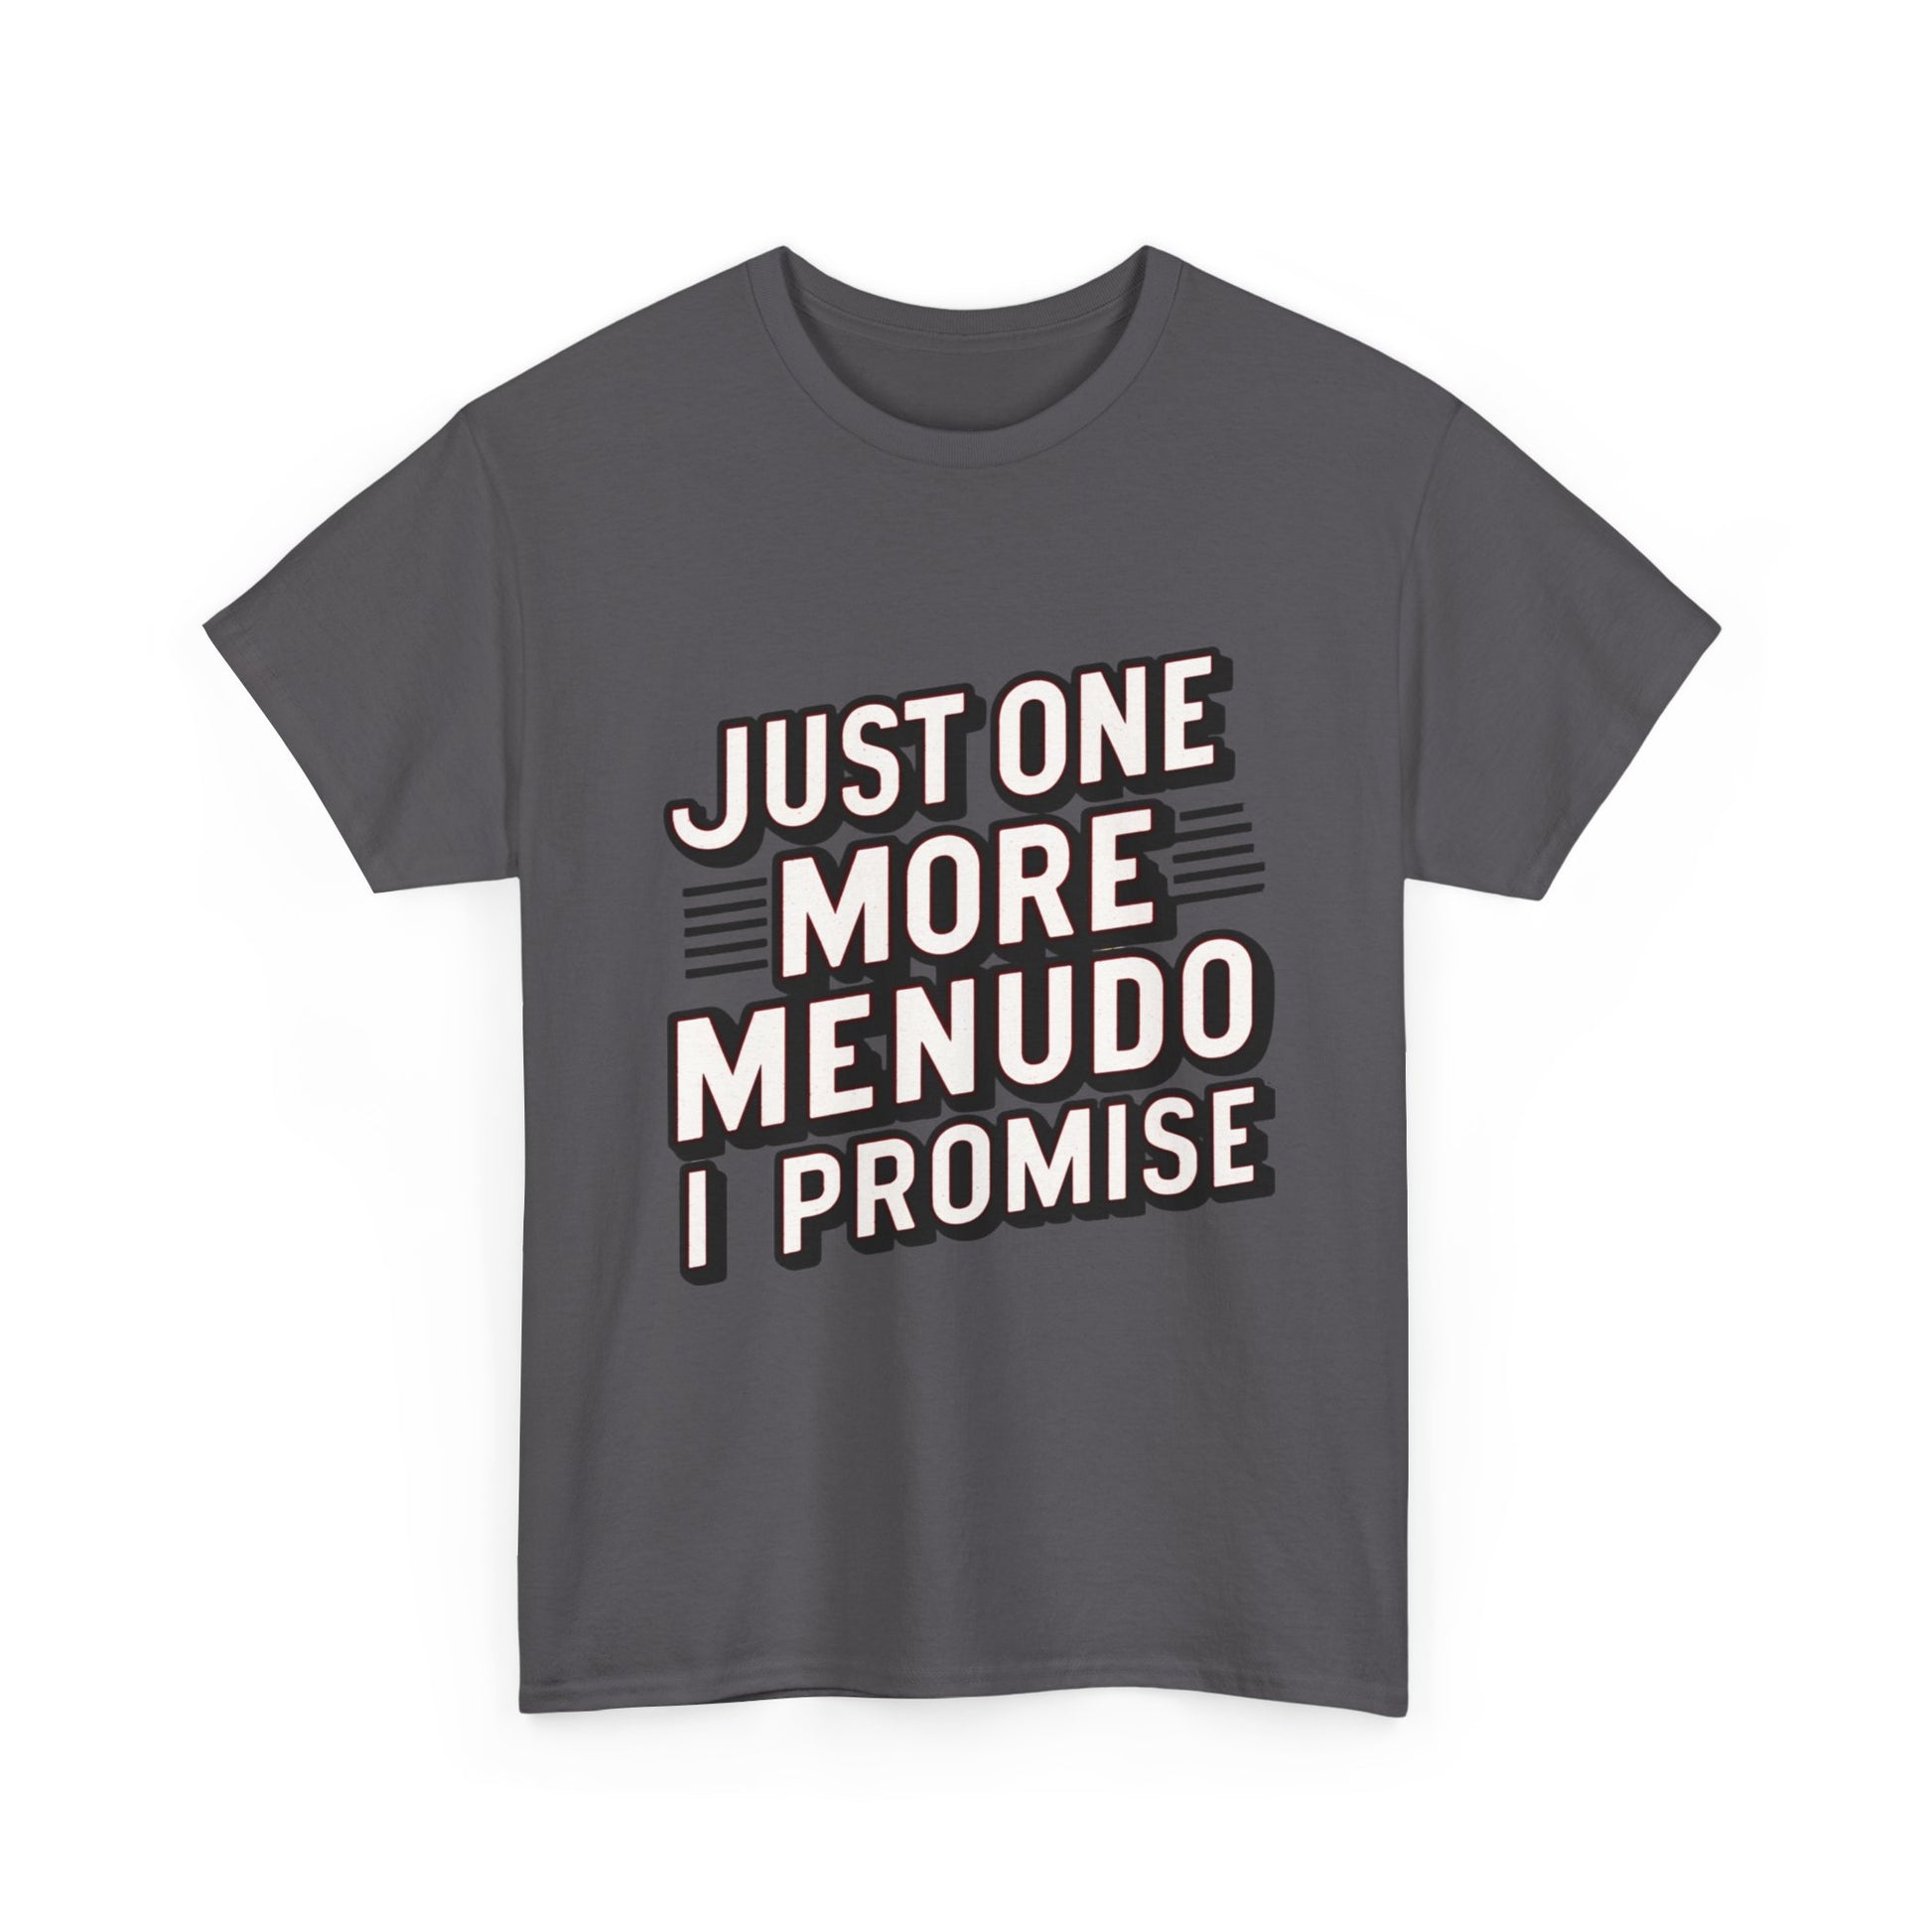 Just One More Menudo I Promise Mexican Food Graphic Unisex Heavy Cotton Tee Cotton Funny Humorous Graphic Soft Premium Unisex Men Women Charcoal T-shirt Birthday Gift-18